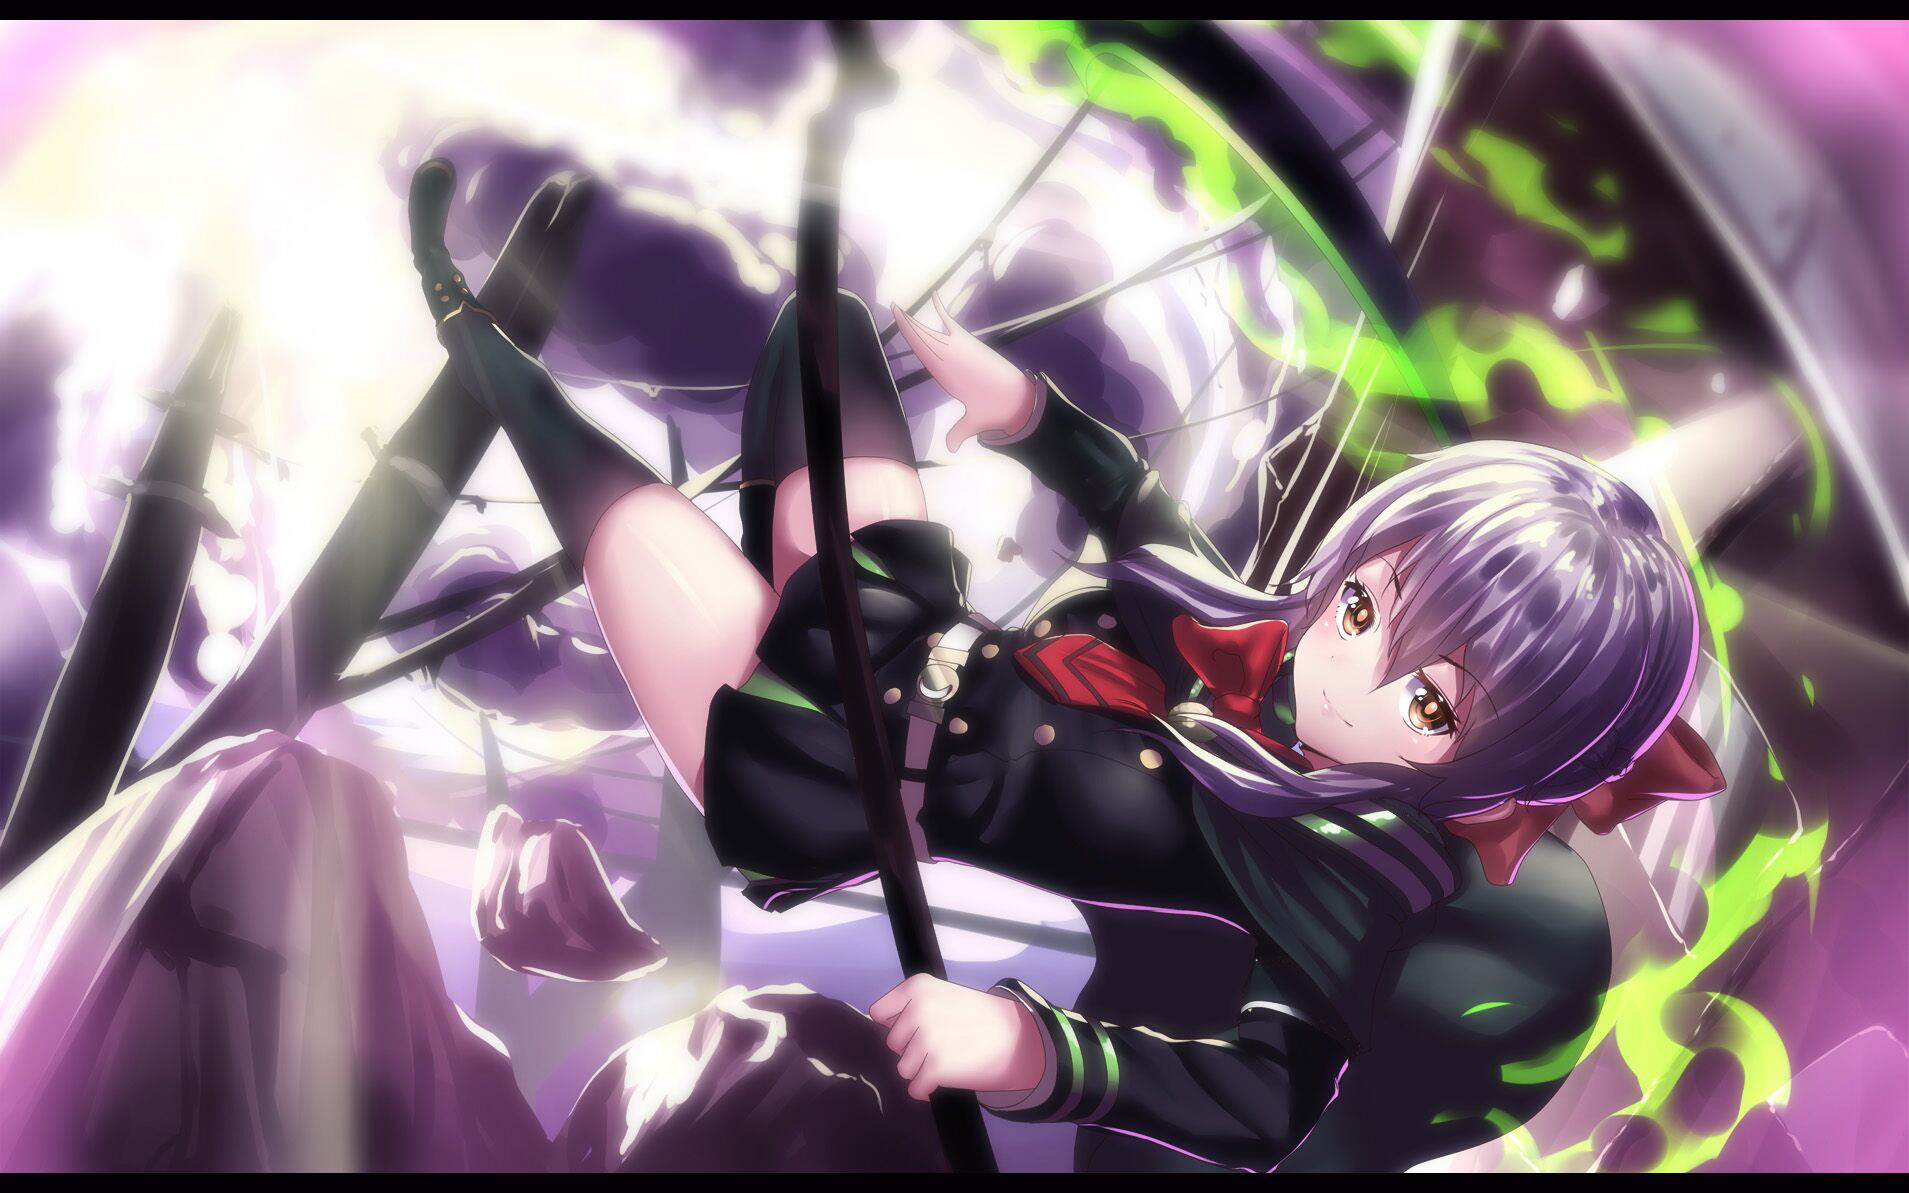 Anime Seraph of the End Wallpaper by HK (Pixiv)